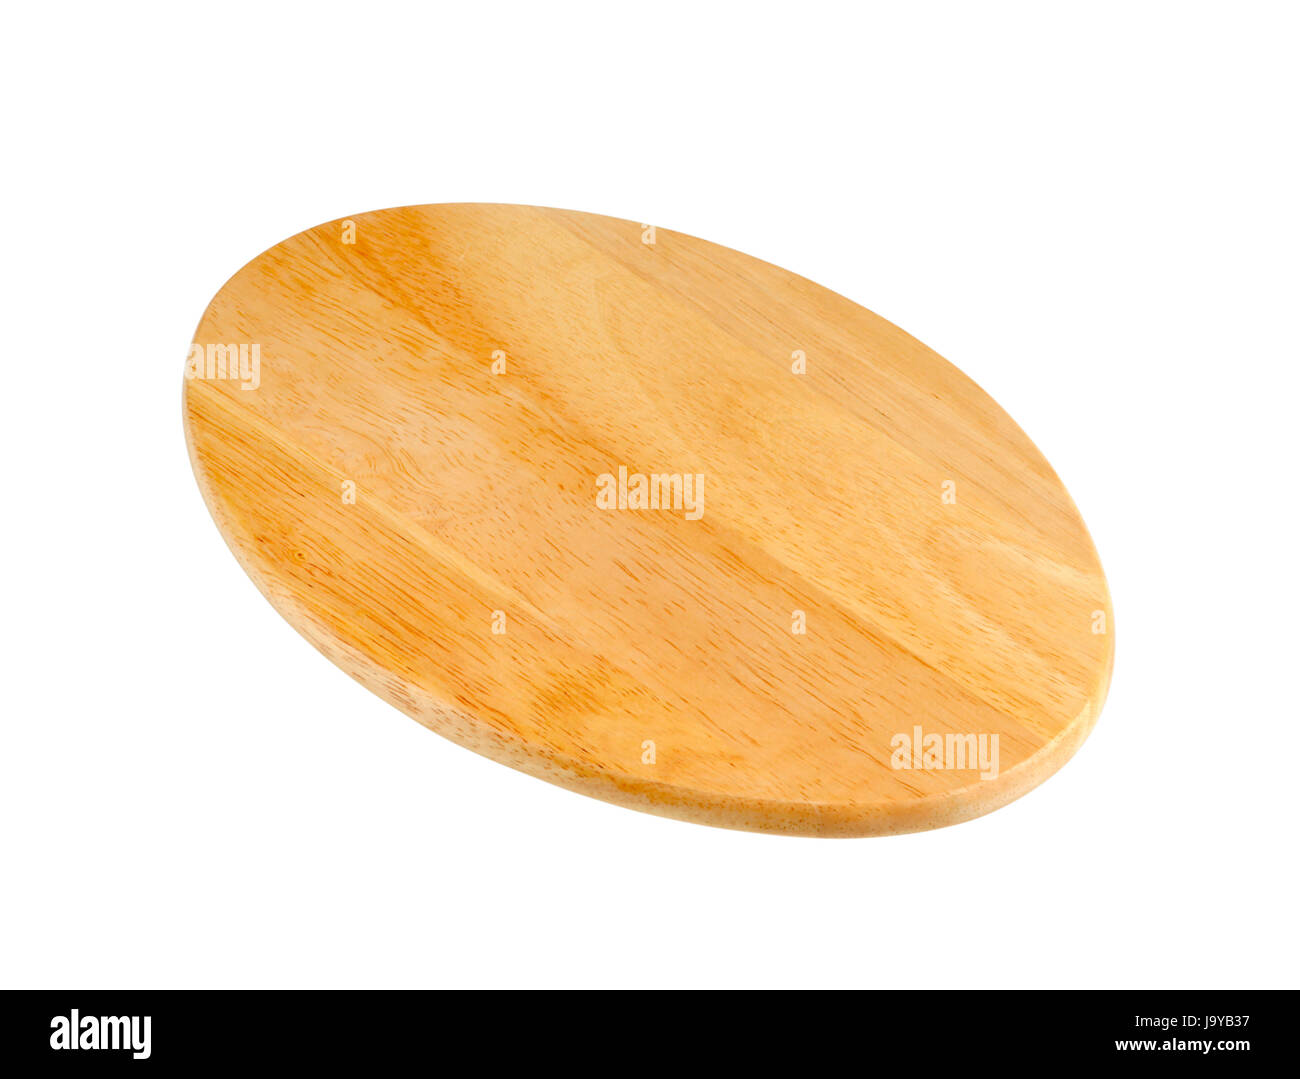 object, isolated, one, smooth, wooden, oval, cutout, cutting board, chopping Stock Photo